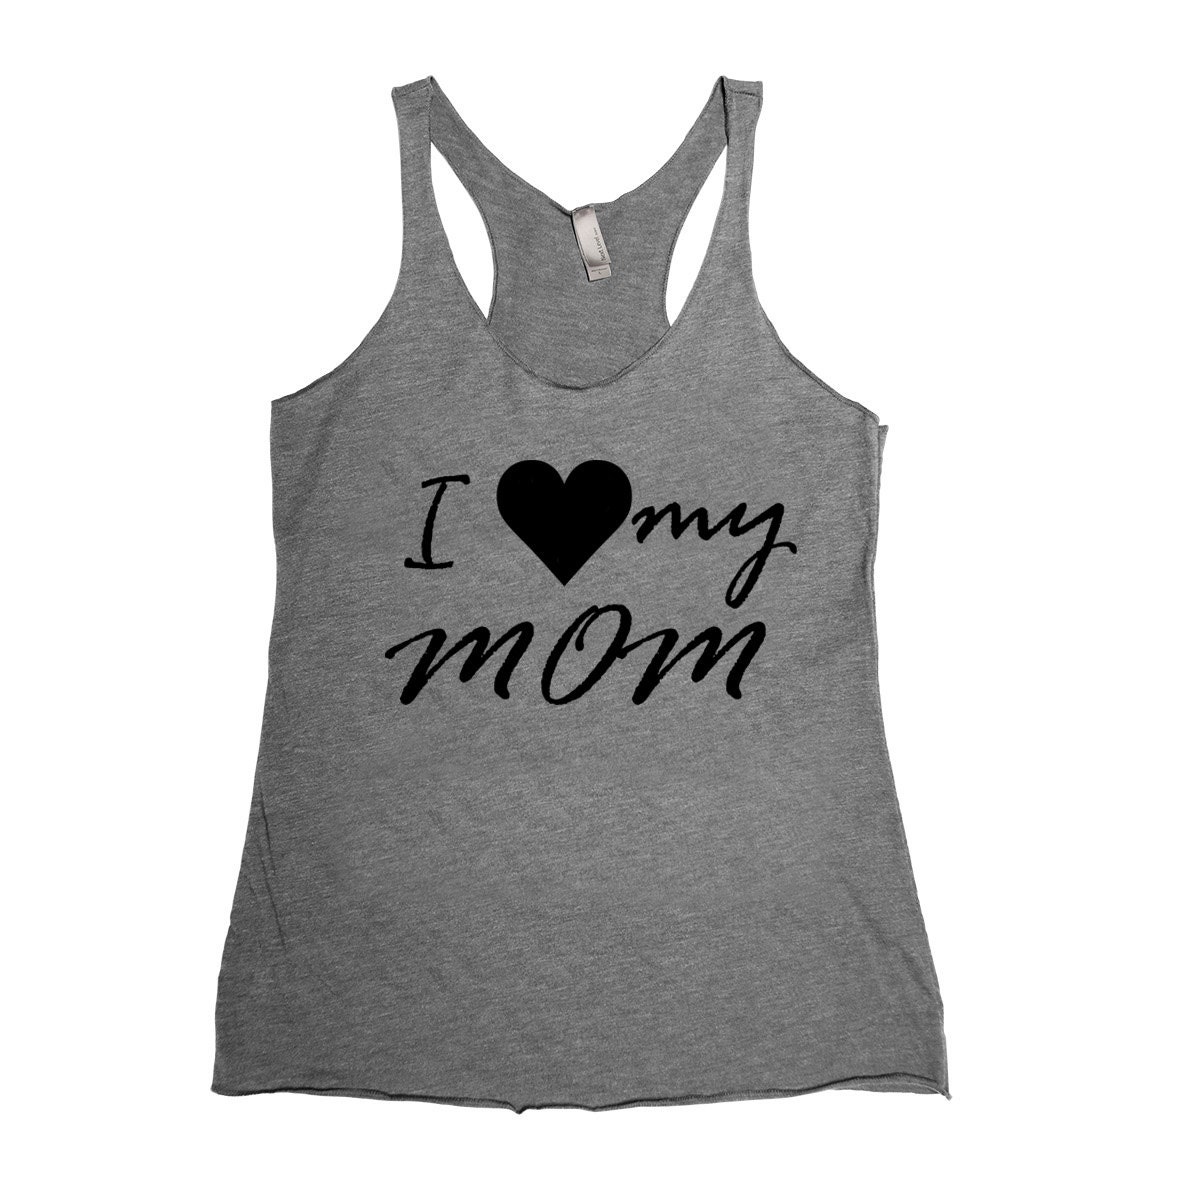 I Love My Mom Mother's Day Racerback Triblend Next Level Tank Top Hand Screen Printed S, M, L, Xl